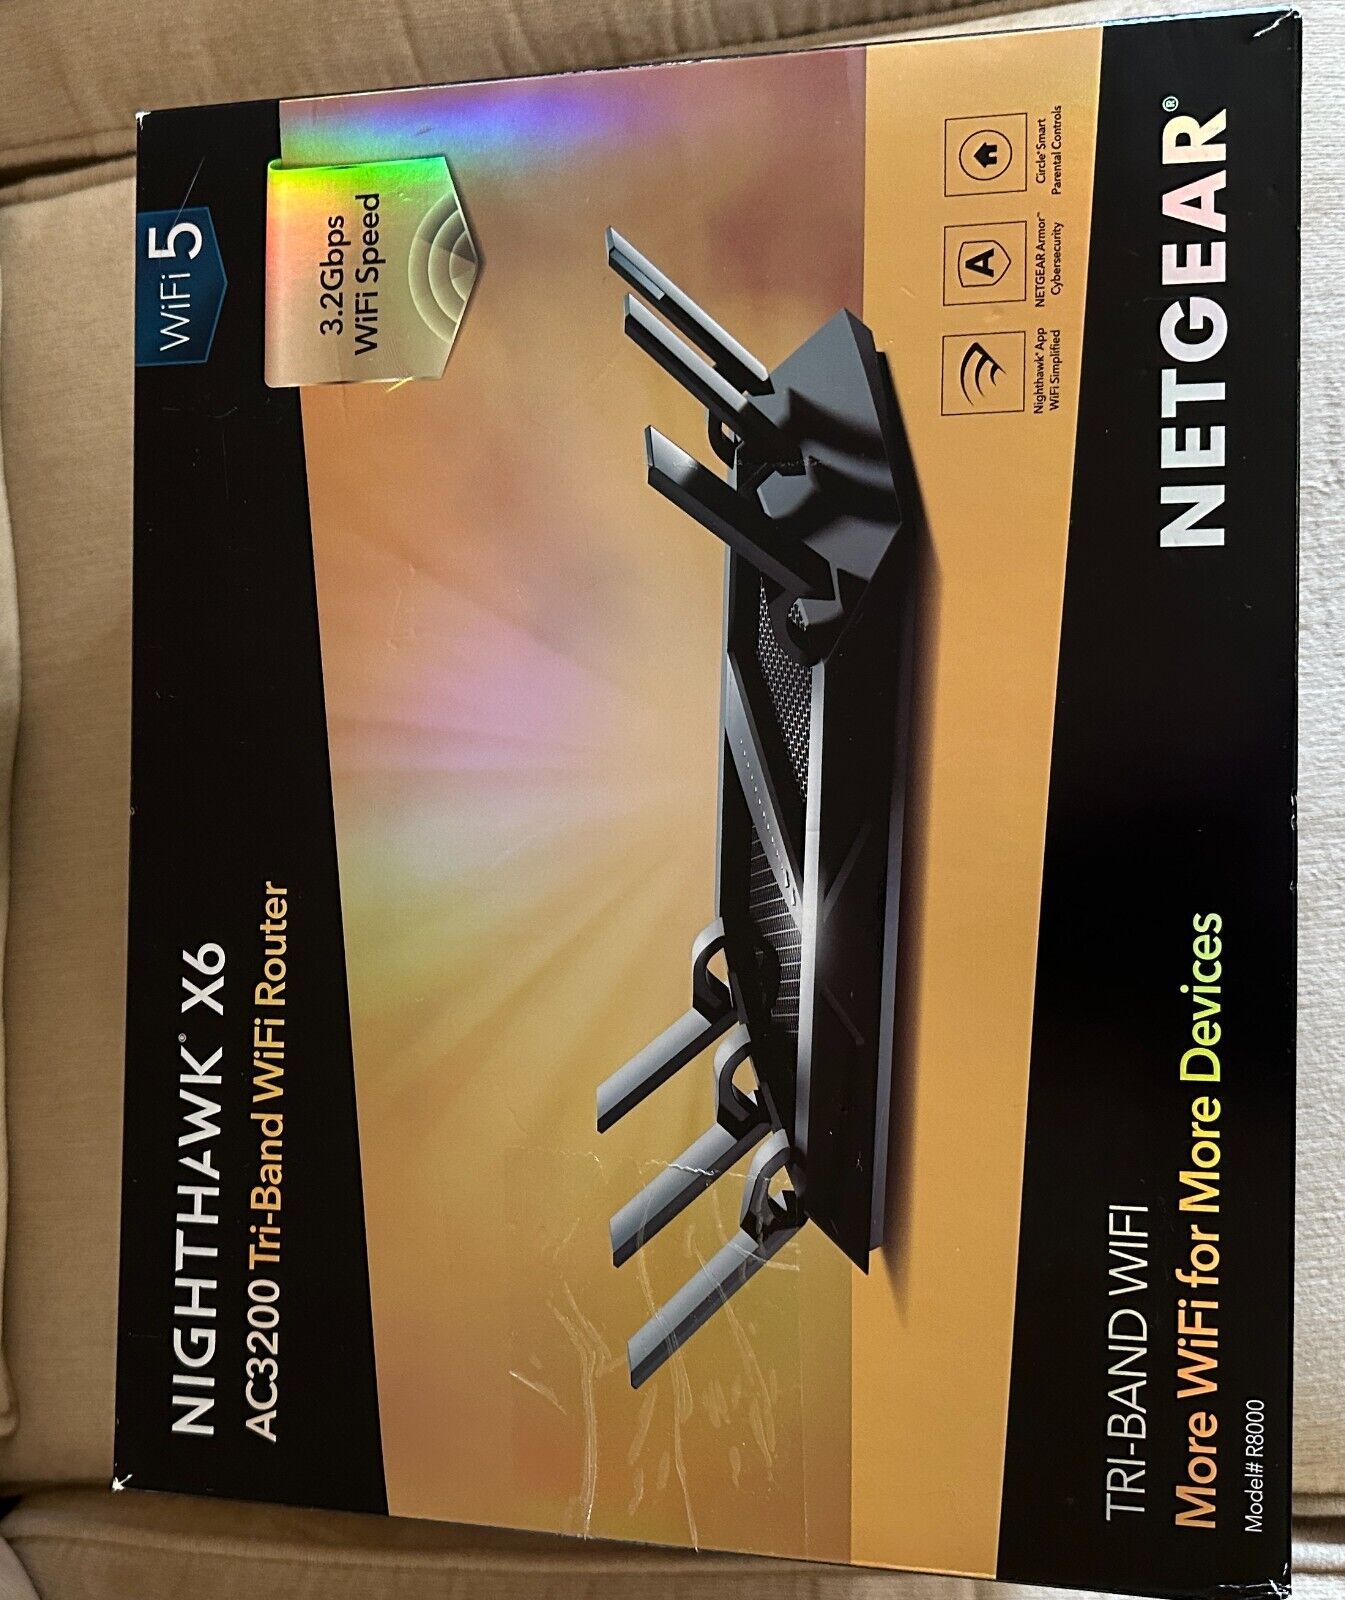 NETGEAR R8000 3200 Mbps 5 Port 3200 Mbps Tri-Band Wireless Router (R8000-100NAS)